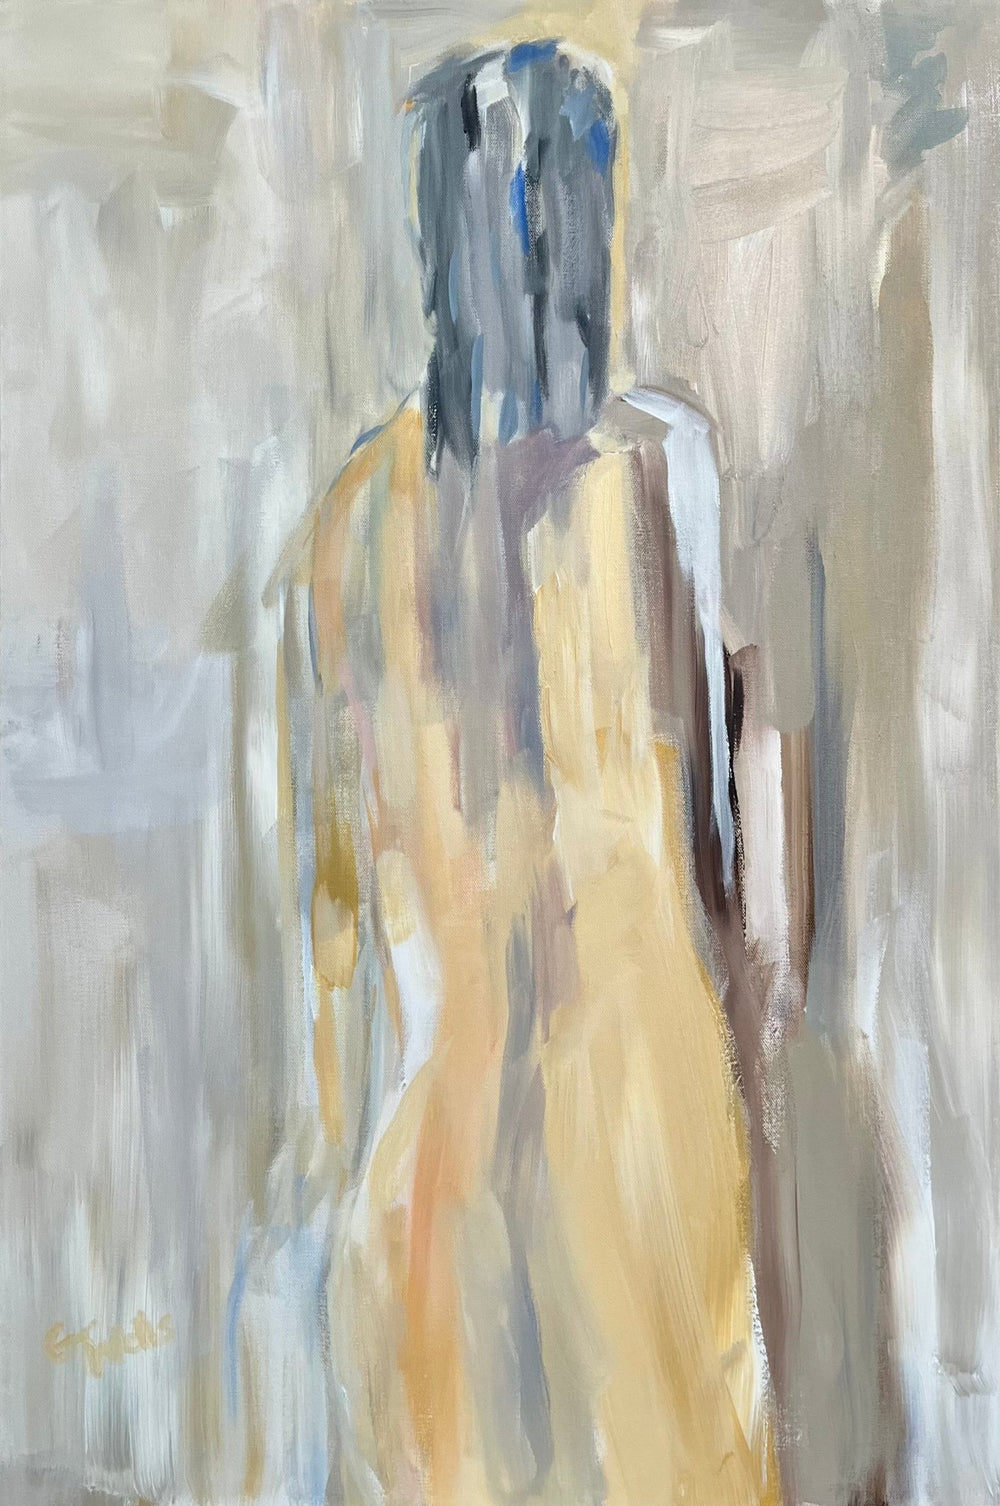 Abstract painting by Geoff Wells of female figure view from behind titled Bathhouse- Artly International